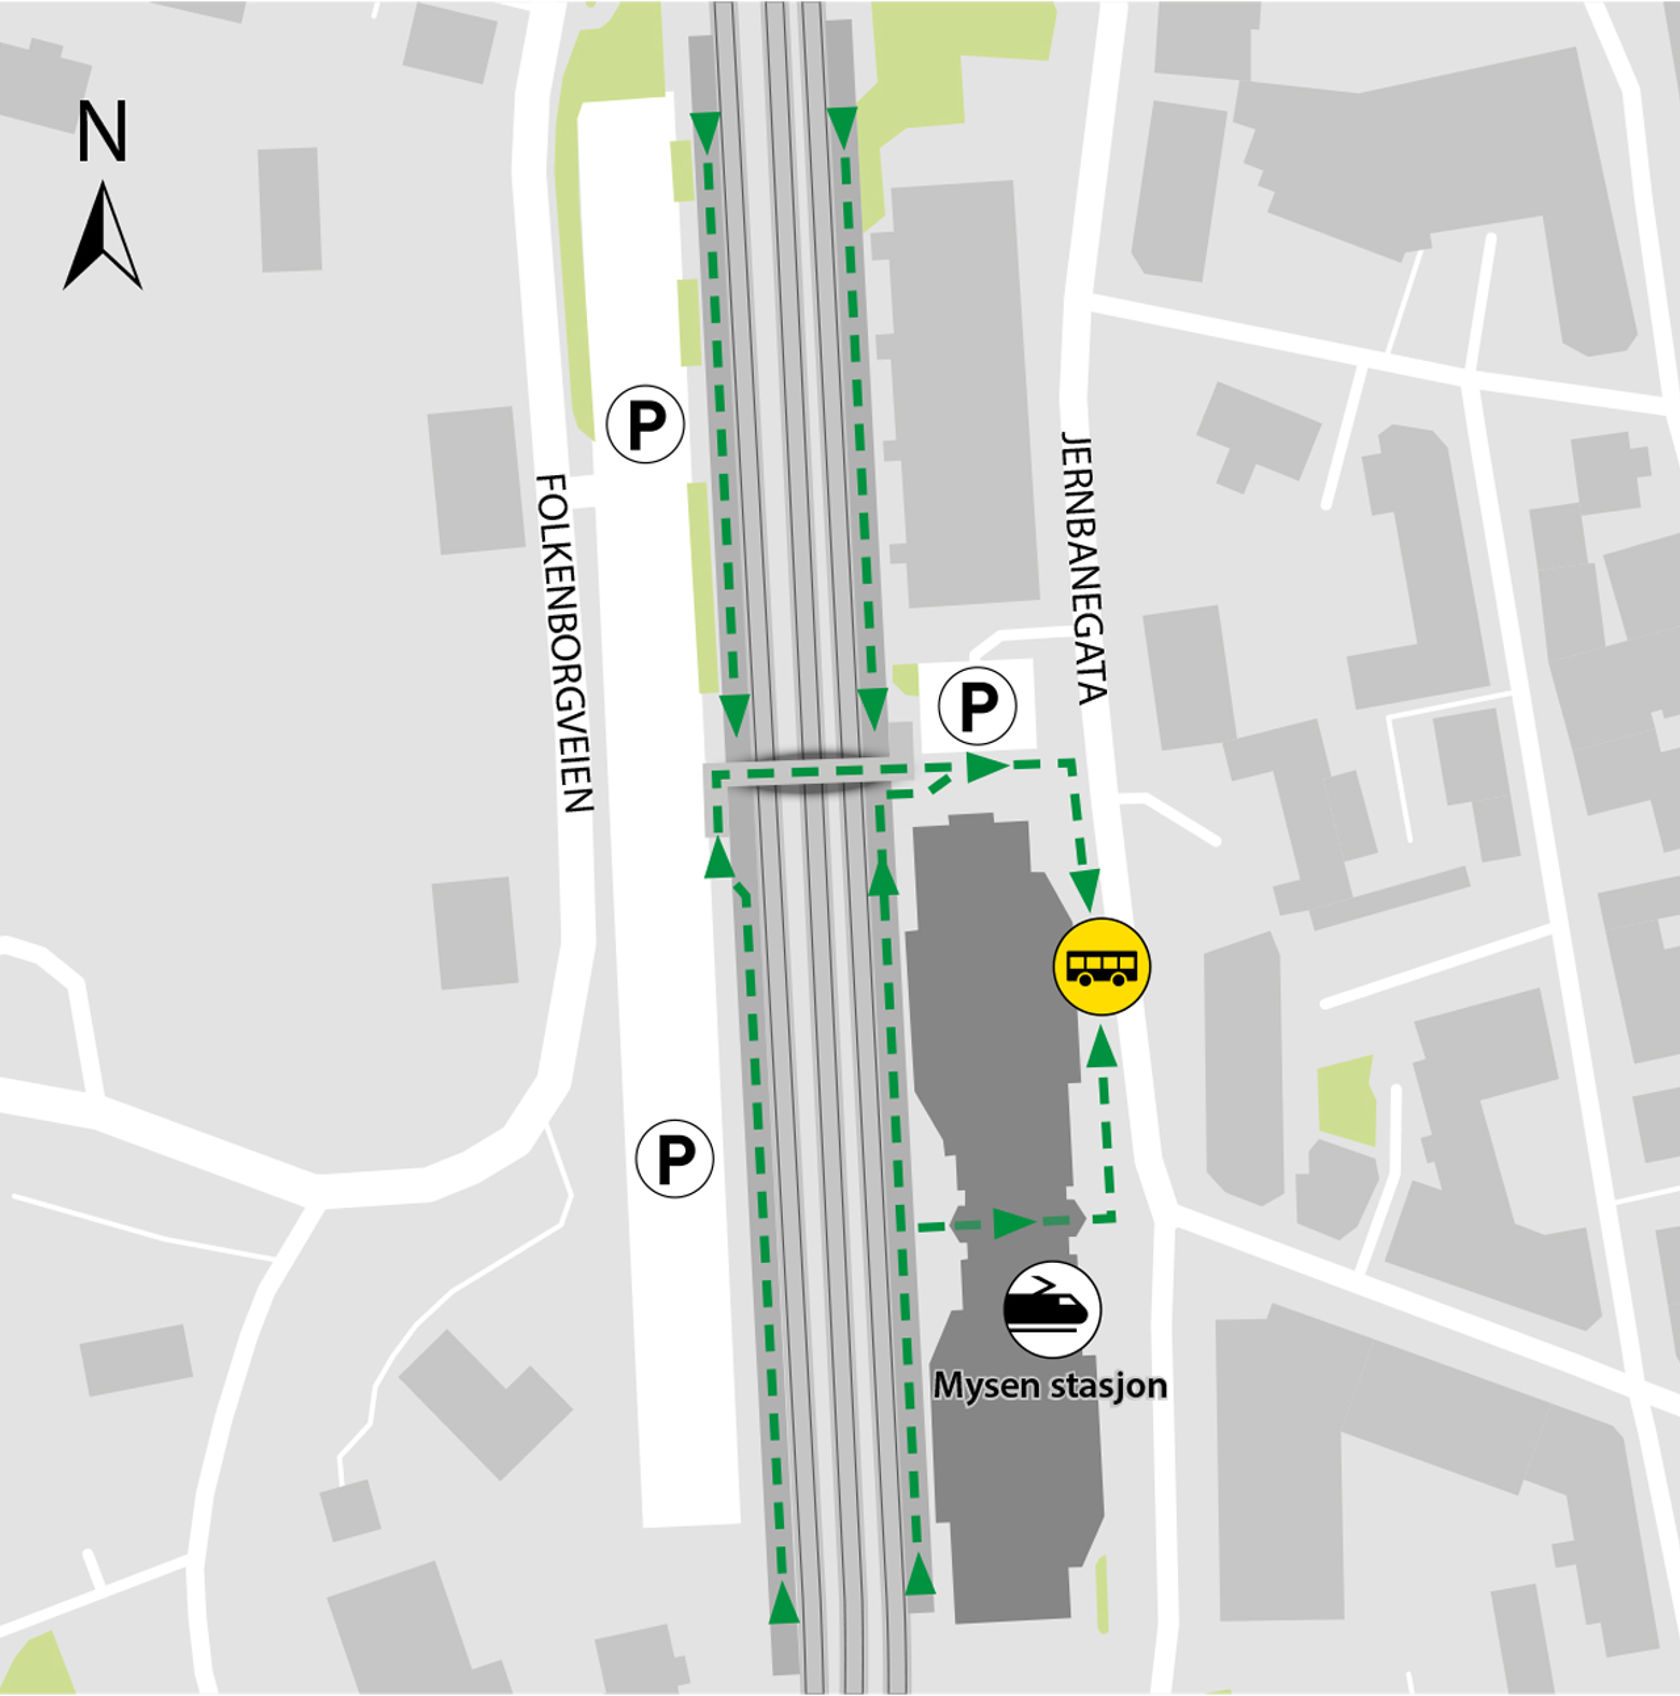 Map shows rail replacement service departs from bus stop Mysen station.